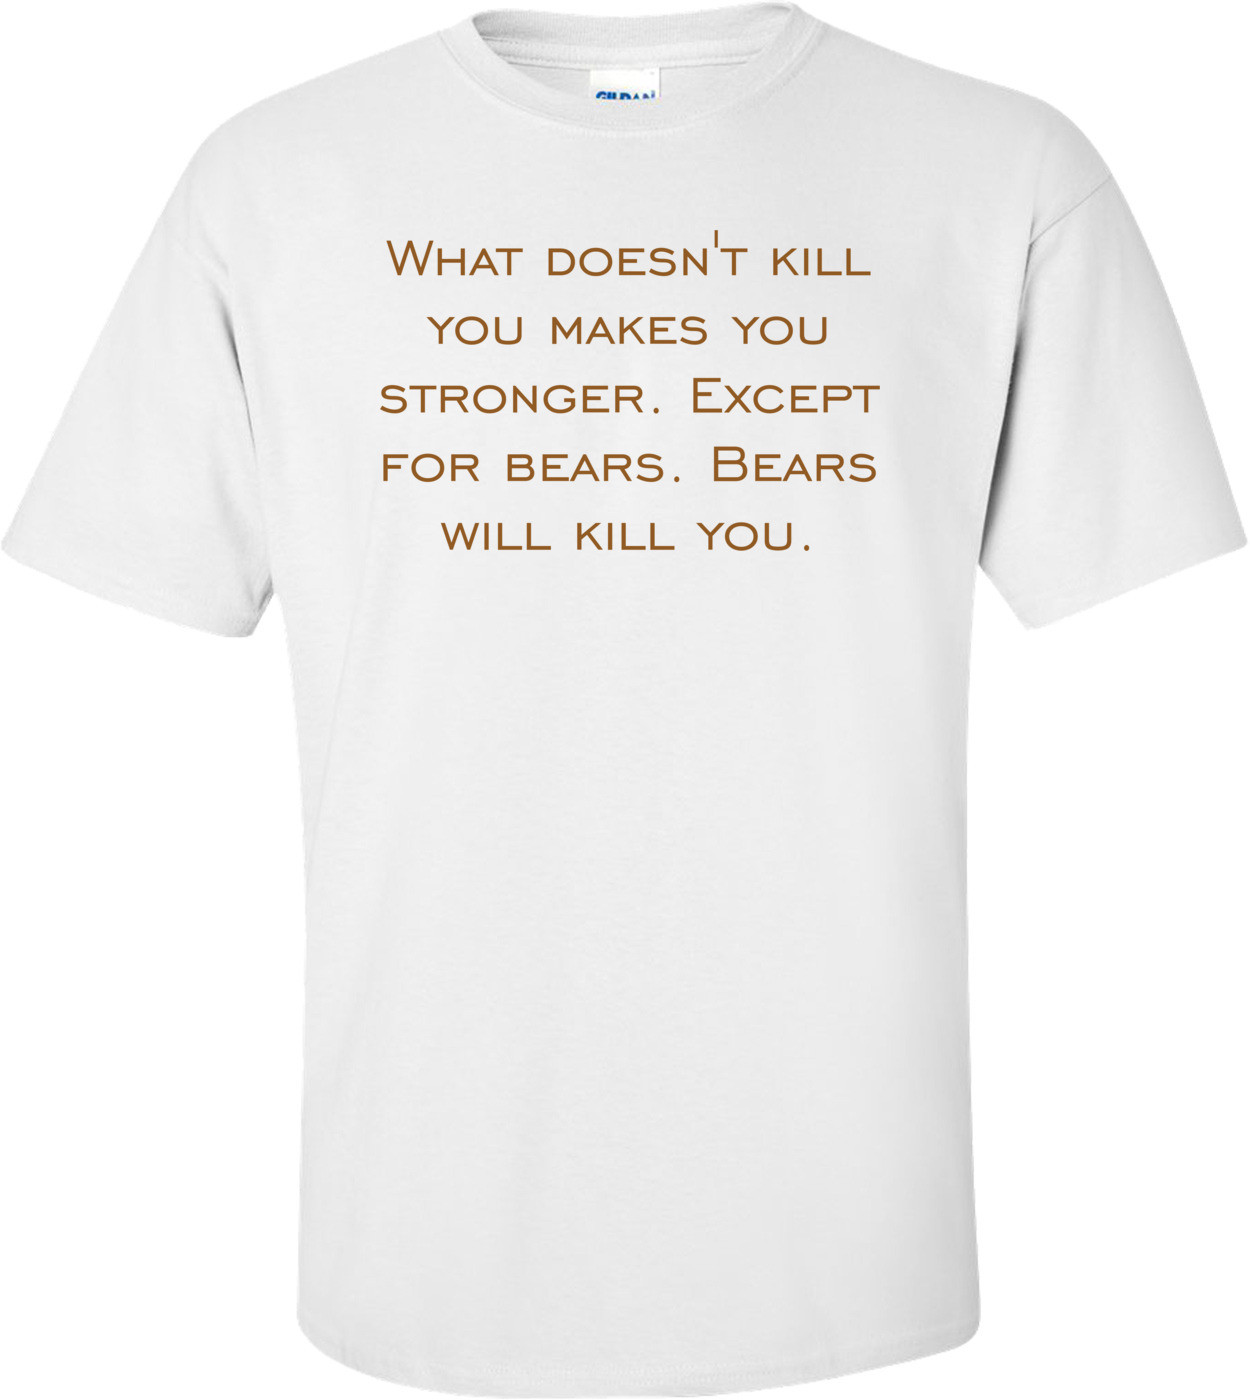 What doesn't kill you makes you stronger. Except for bears. Bears will kill you. Shirt